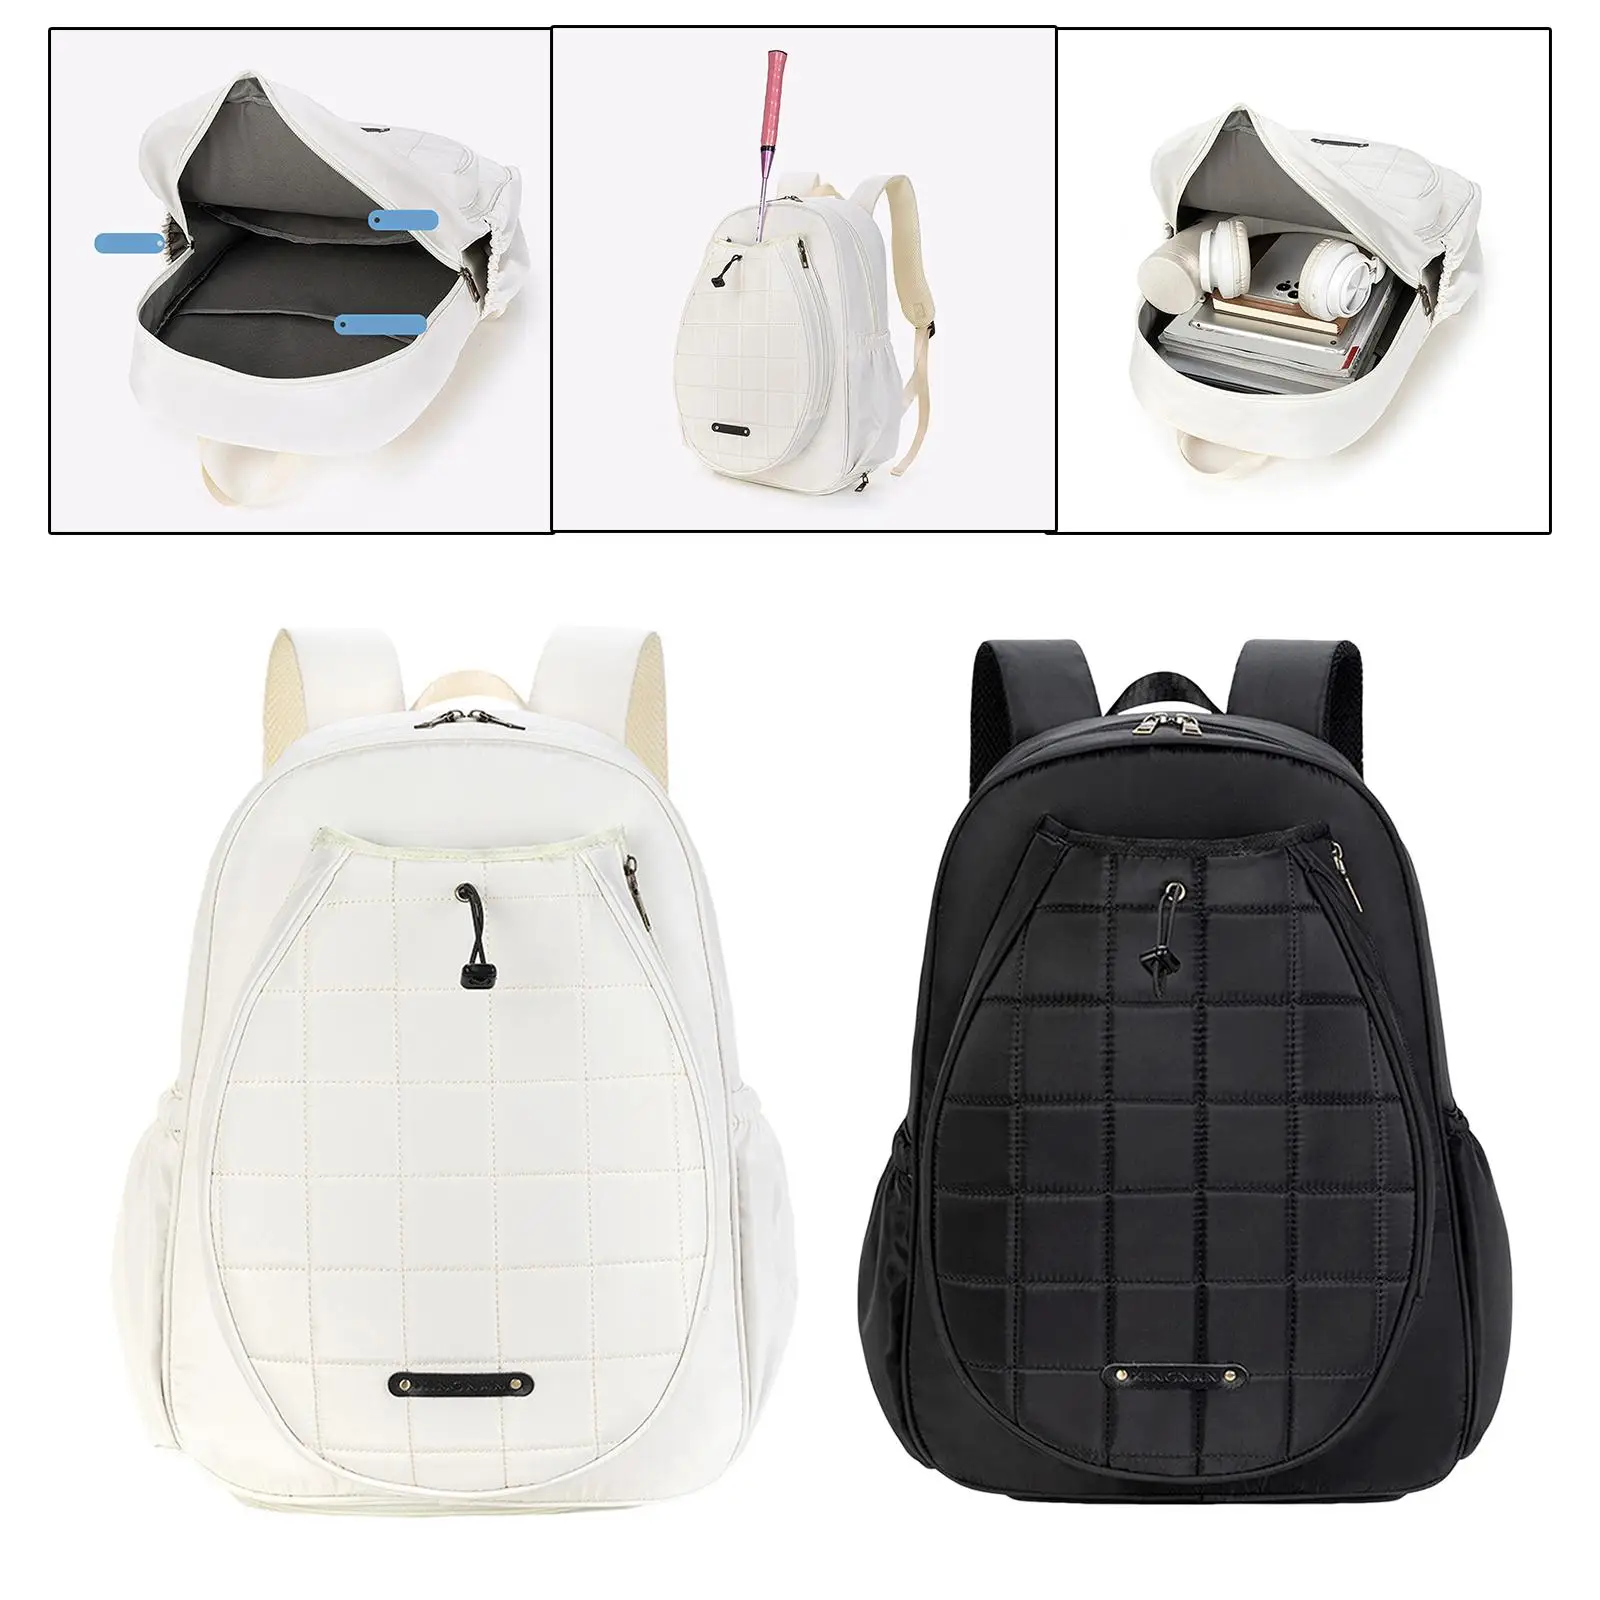 Tennis Backpack Tennis Bag with Shoe Compartment Portable Fitness Sport Large Racket Bag for Squash Racquet Pickleball Paddles